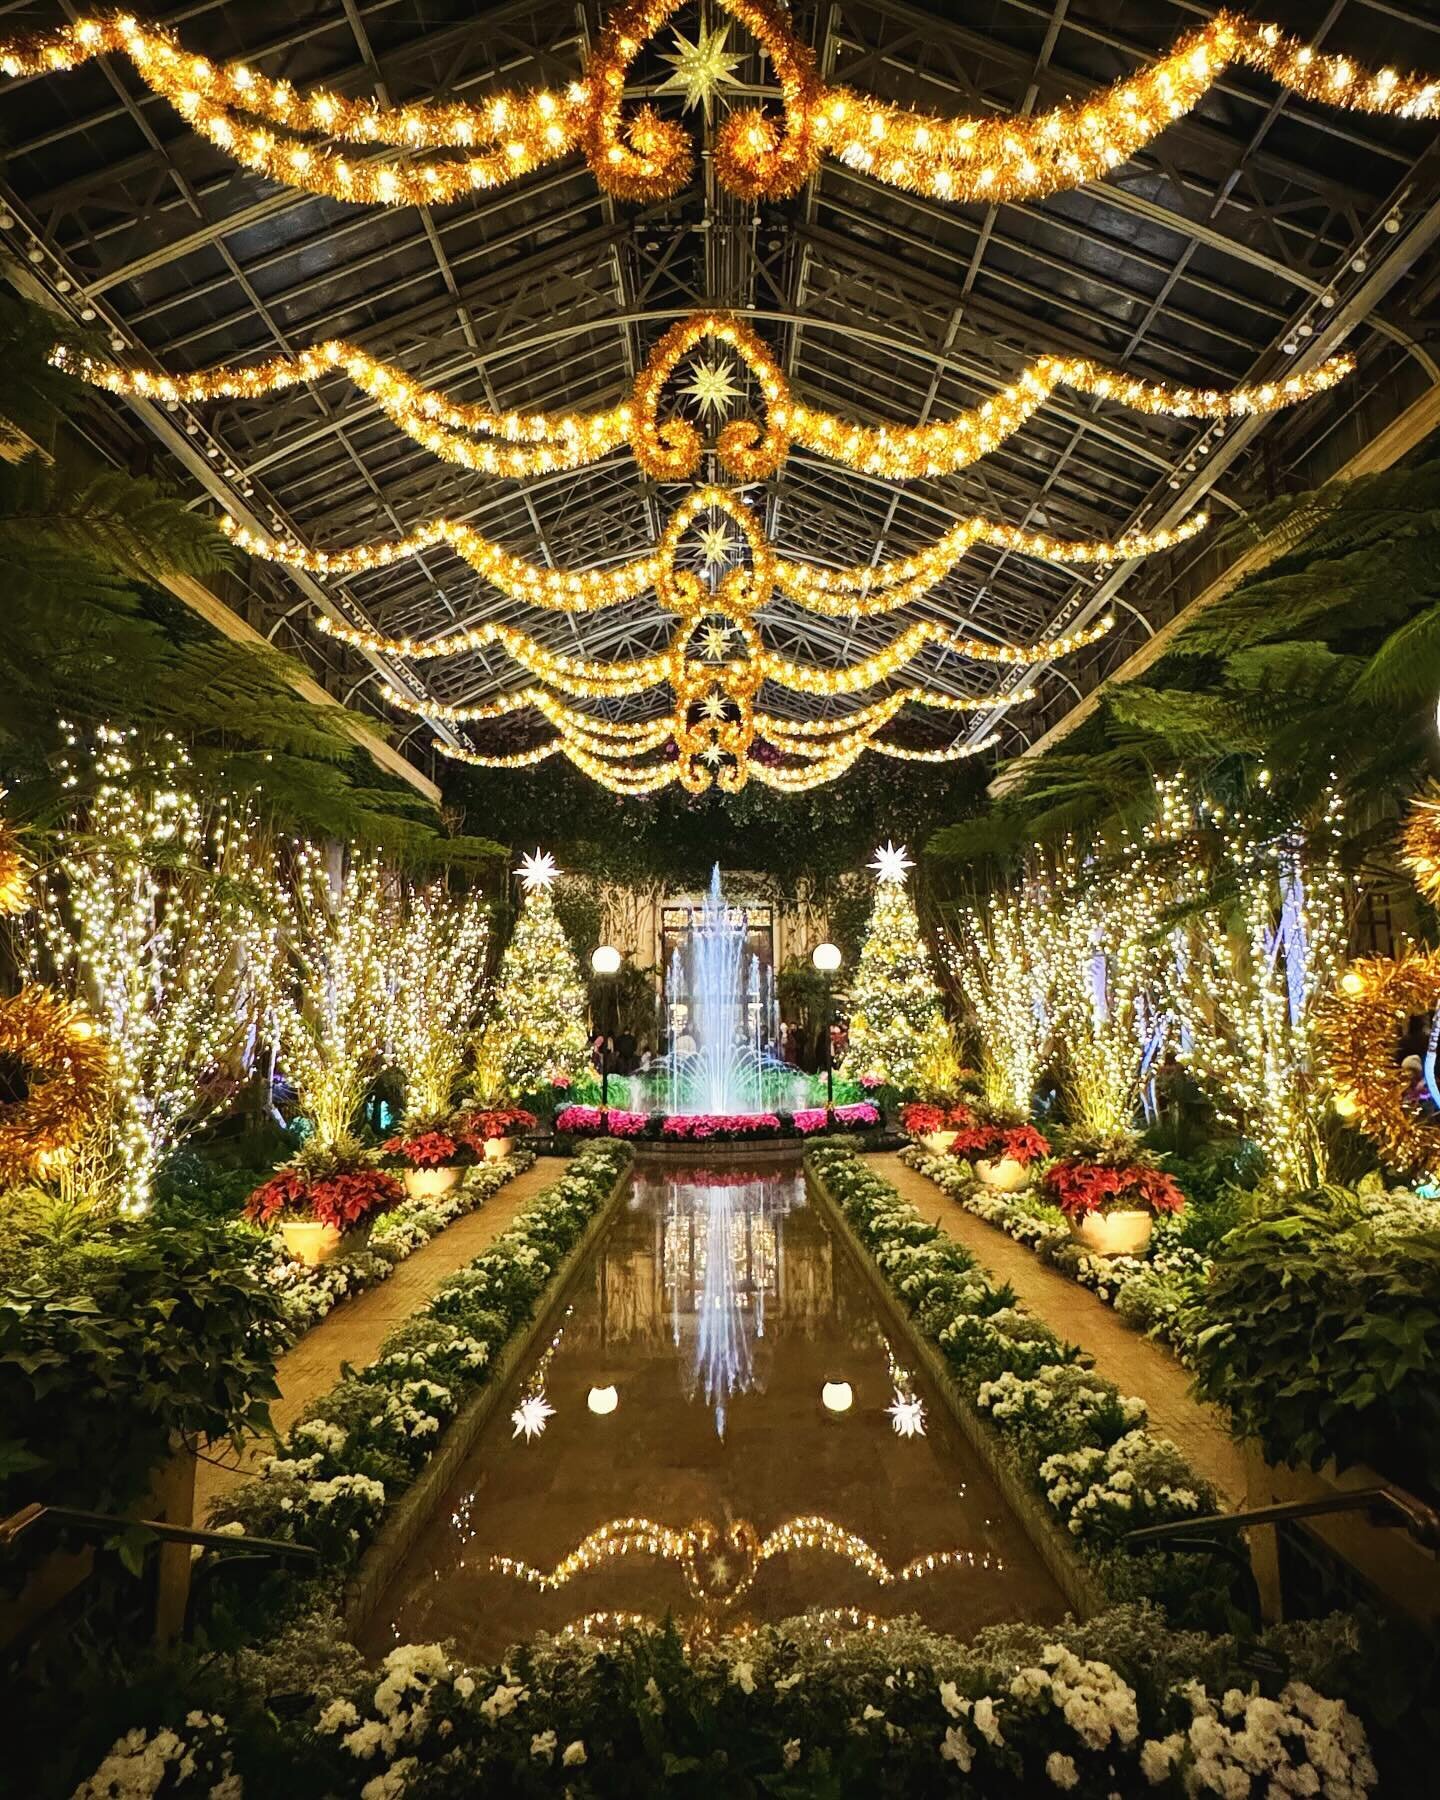 Been 11 years since my last visit to Longwood gardens, but this year I finally got the chance to revisit! Still one of the most beautiful gardens and Christmas light display in the US, a must visit in December if you are in the PA area. #longwoodgard